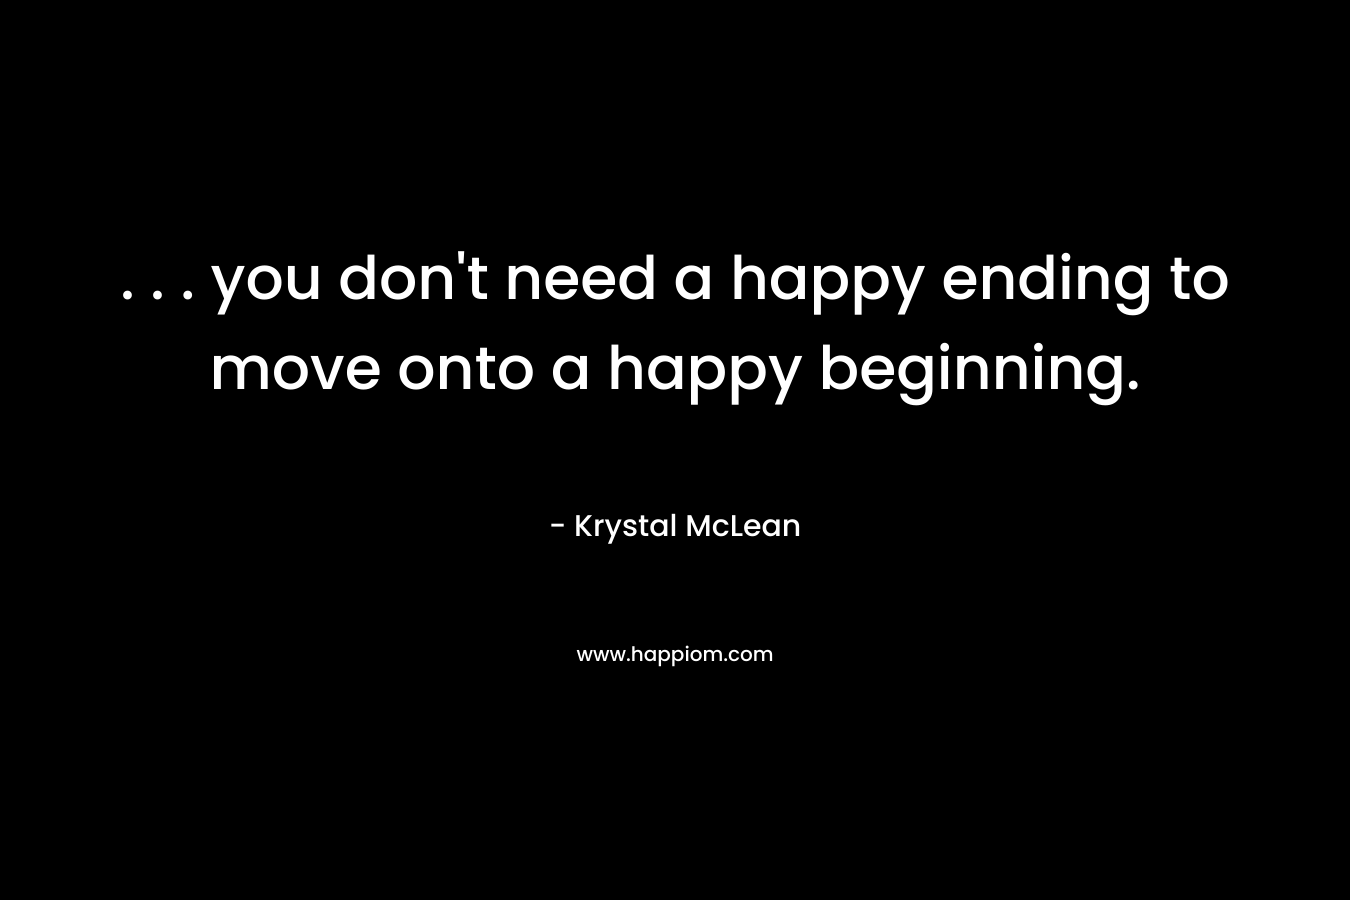 . . . you don't need a happy ending to move onto a happy beginning.